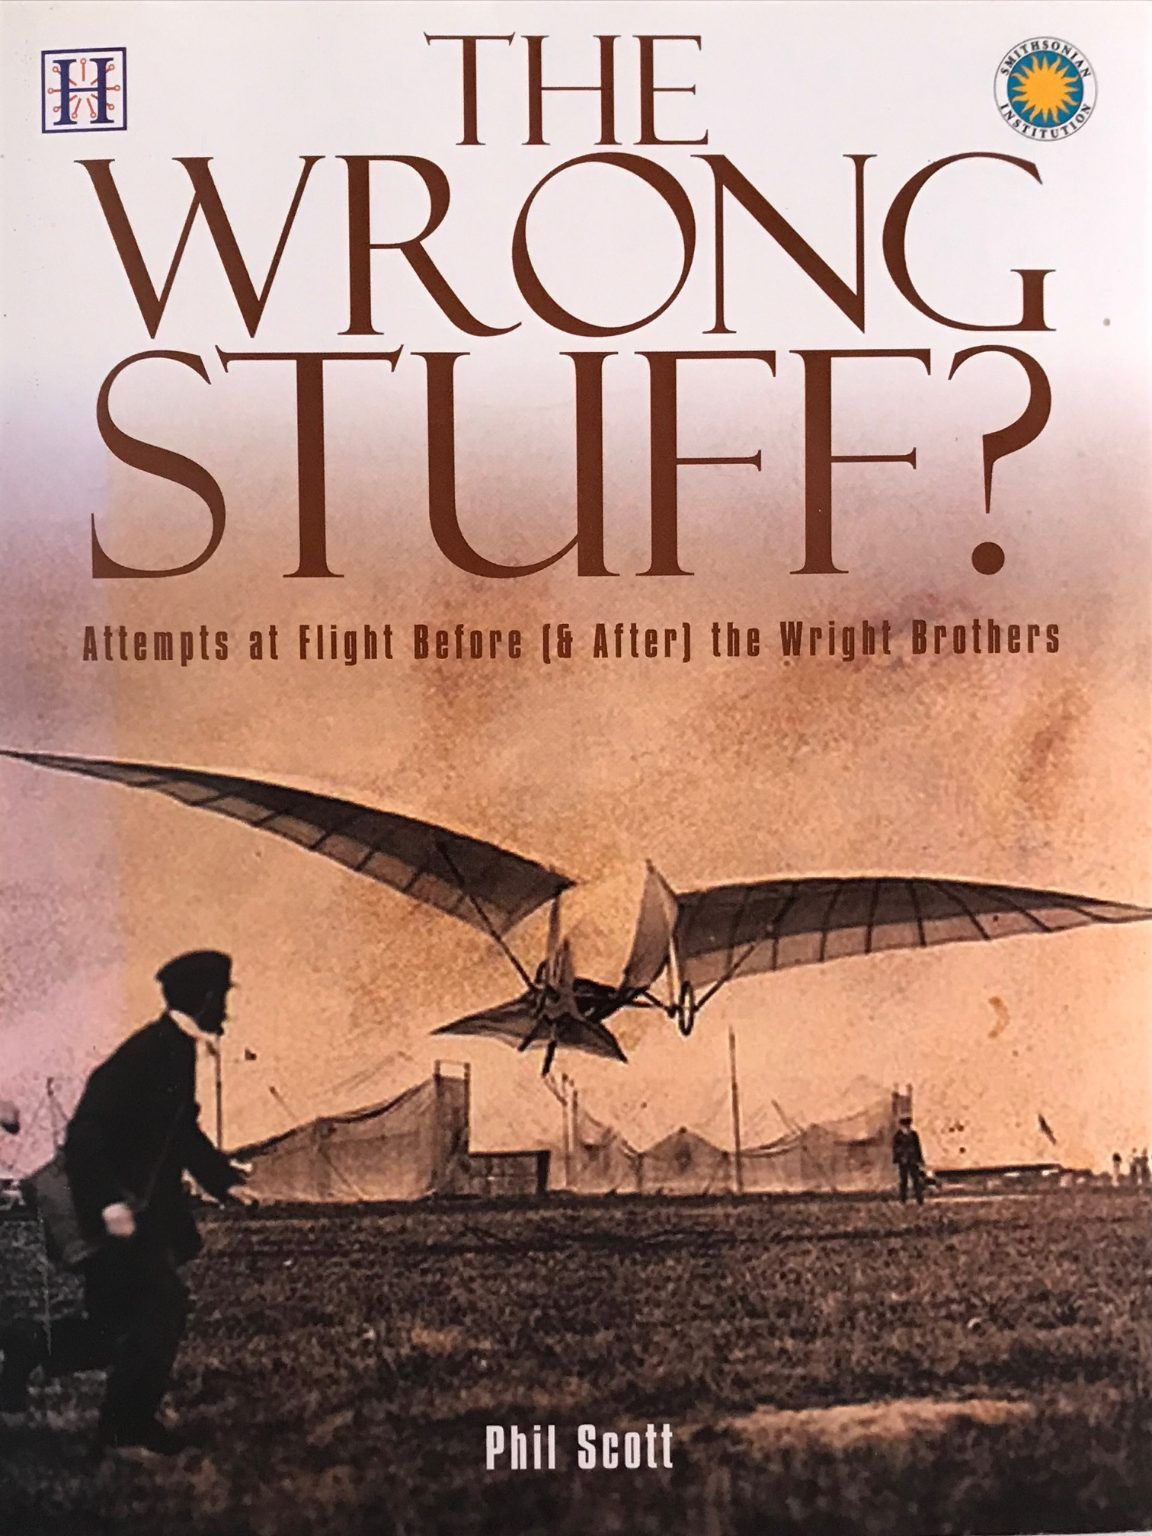 THE WRONG STUFF? Attempts at Flight Before (& After) the Wright Brothers